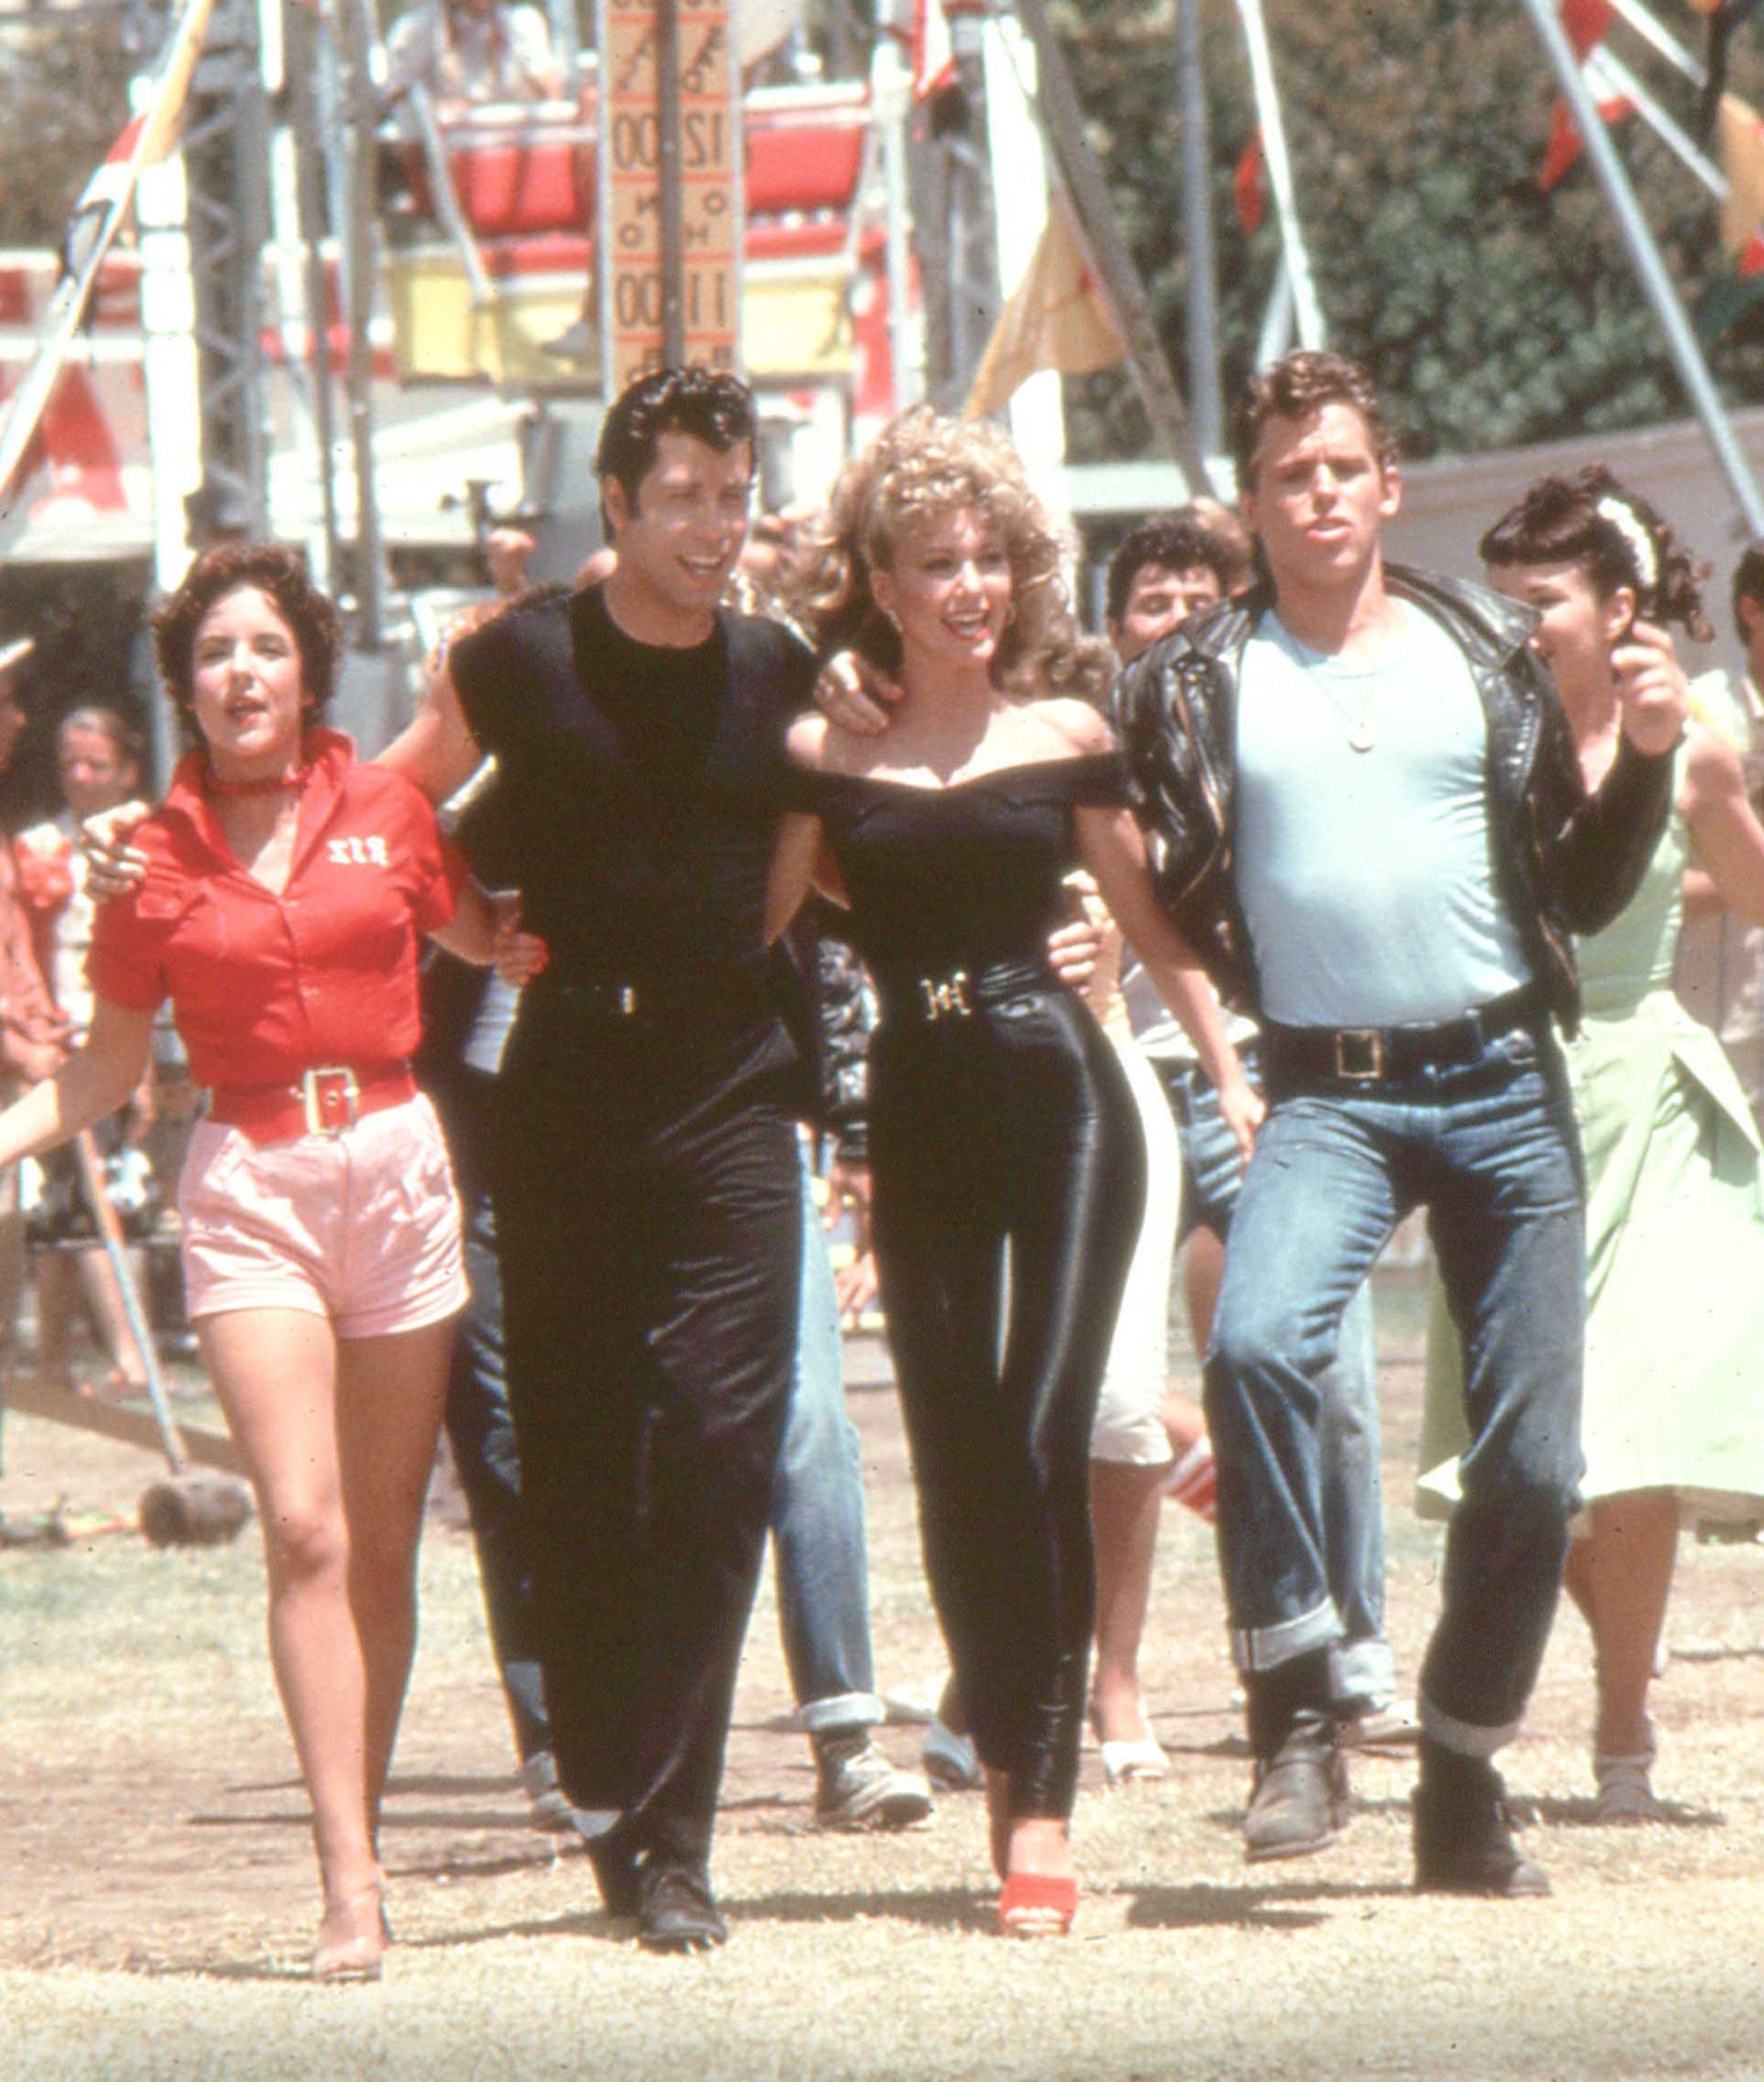 Grease' celebrates 40 years with new movie musicals on horizon